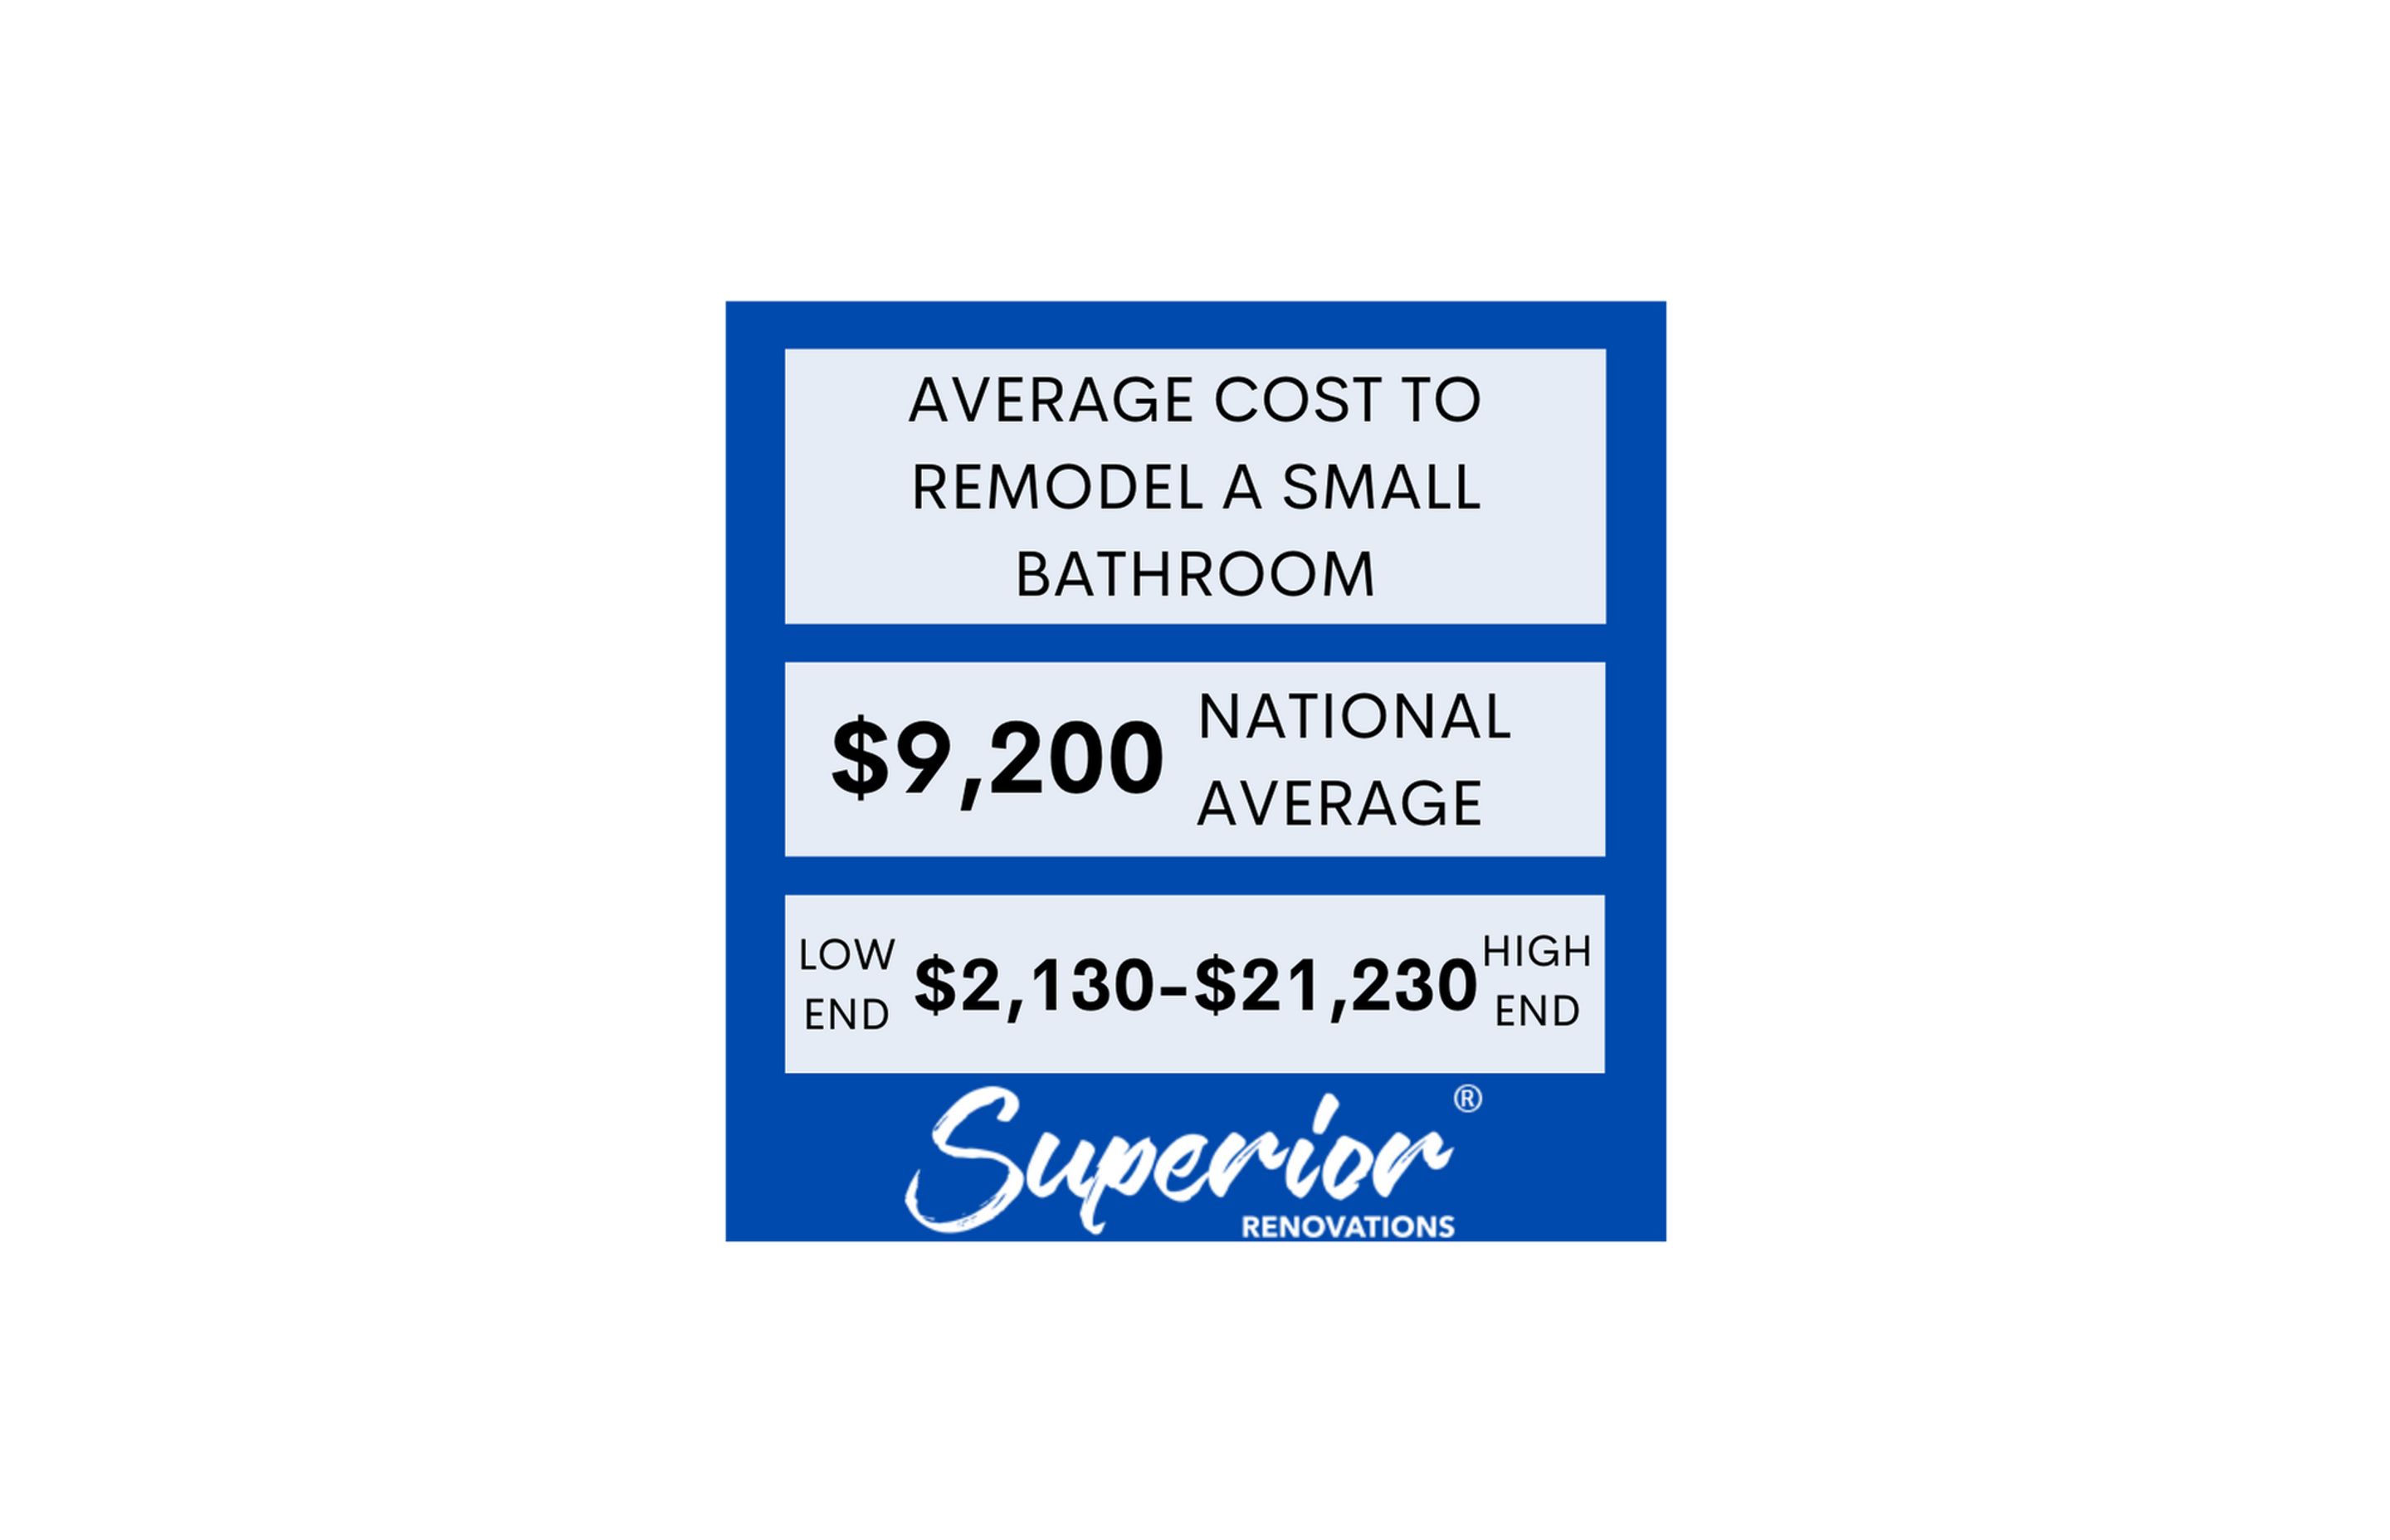 Average Cost to Remodel a Small Bathroom